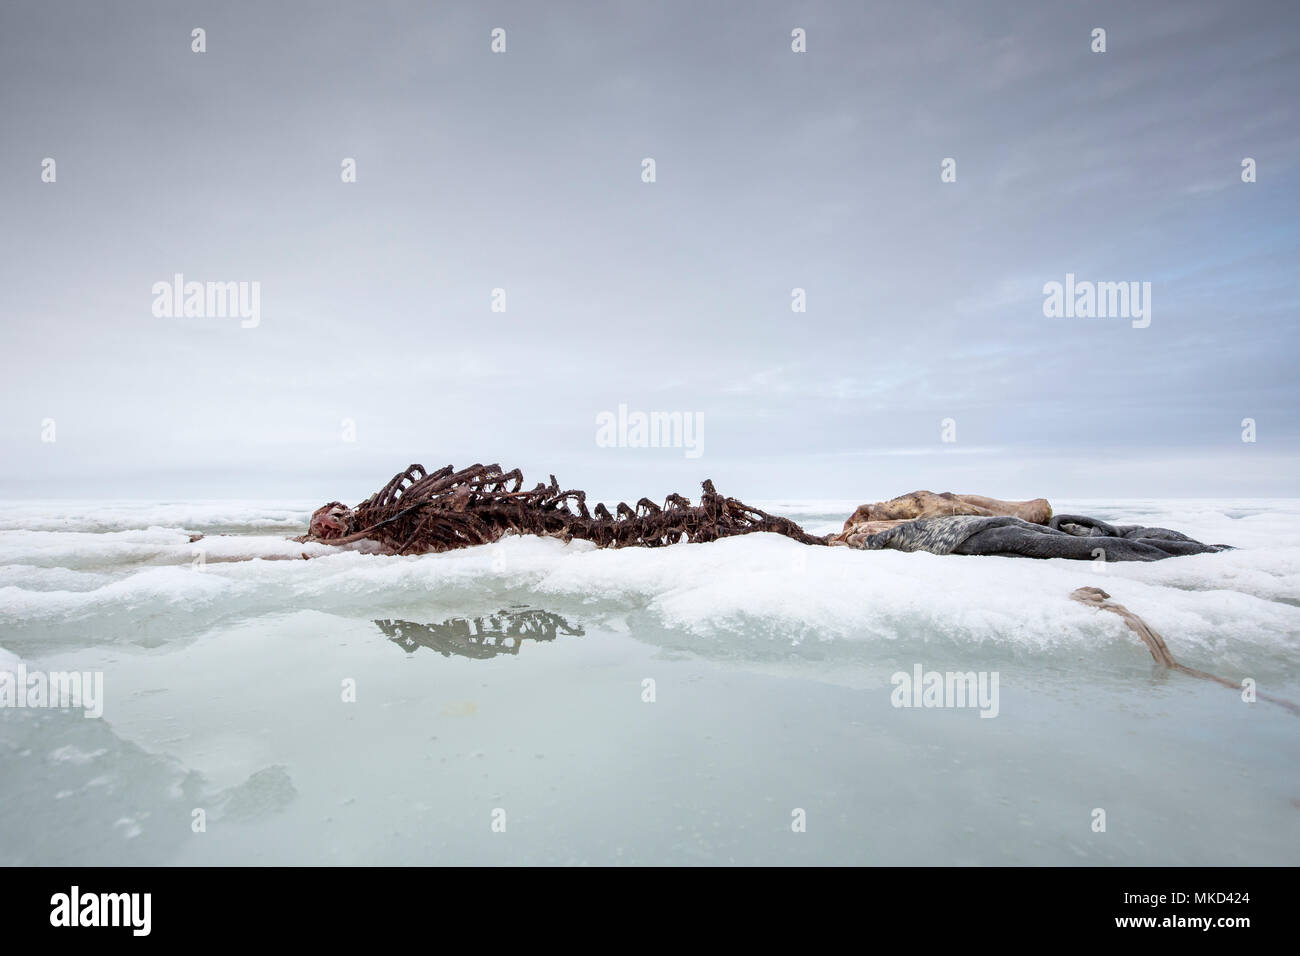 Skeleton of harbor (or harbour) seal (Phoca vitulina), also known as the common seal on the ice, Spitsbergen, Svalbard, Norwegian archipelago, Norway, Arctic Ocean Stock Photo